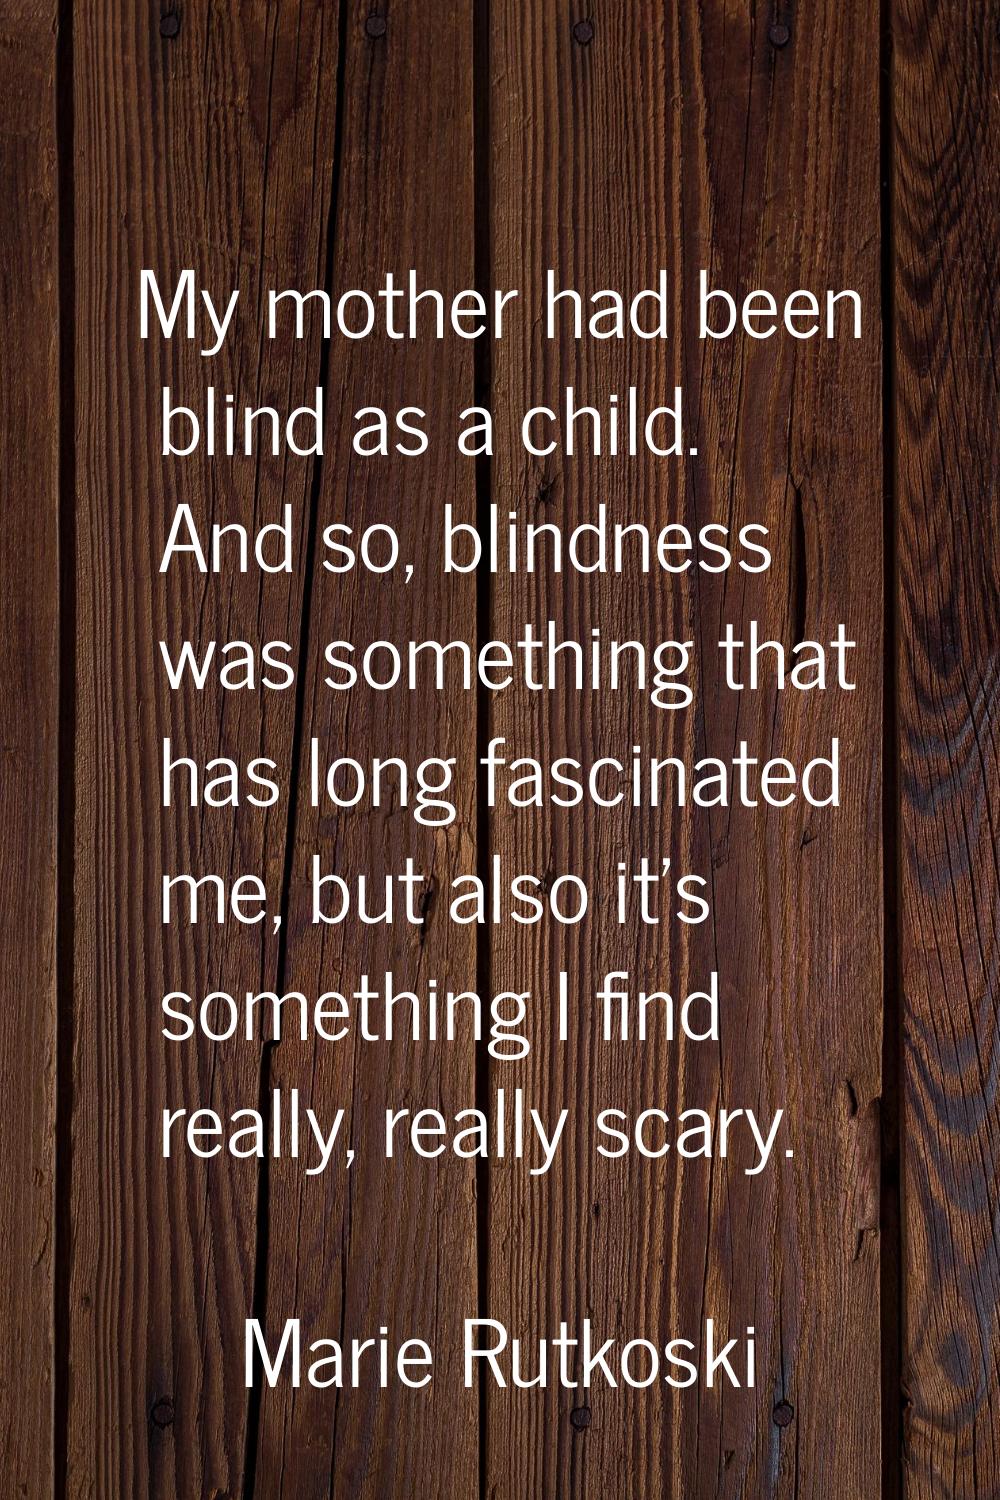 My mother had been blind as a child. And so, blindness was something that has long fascinated me, b